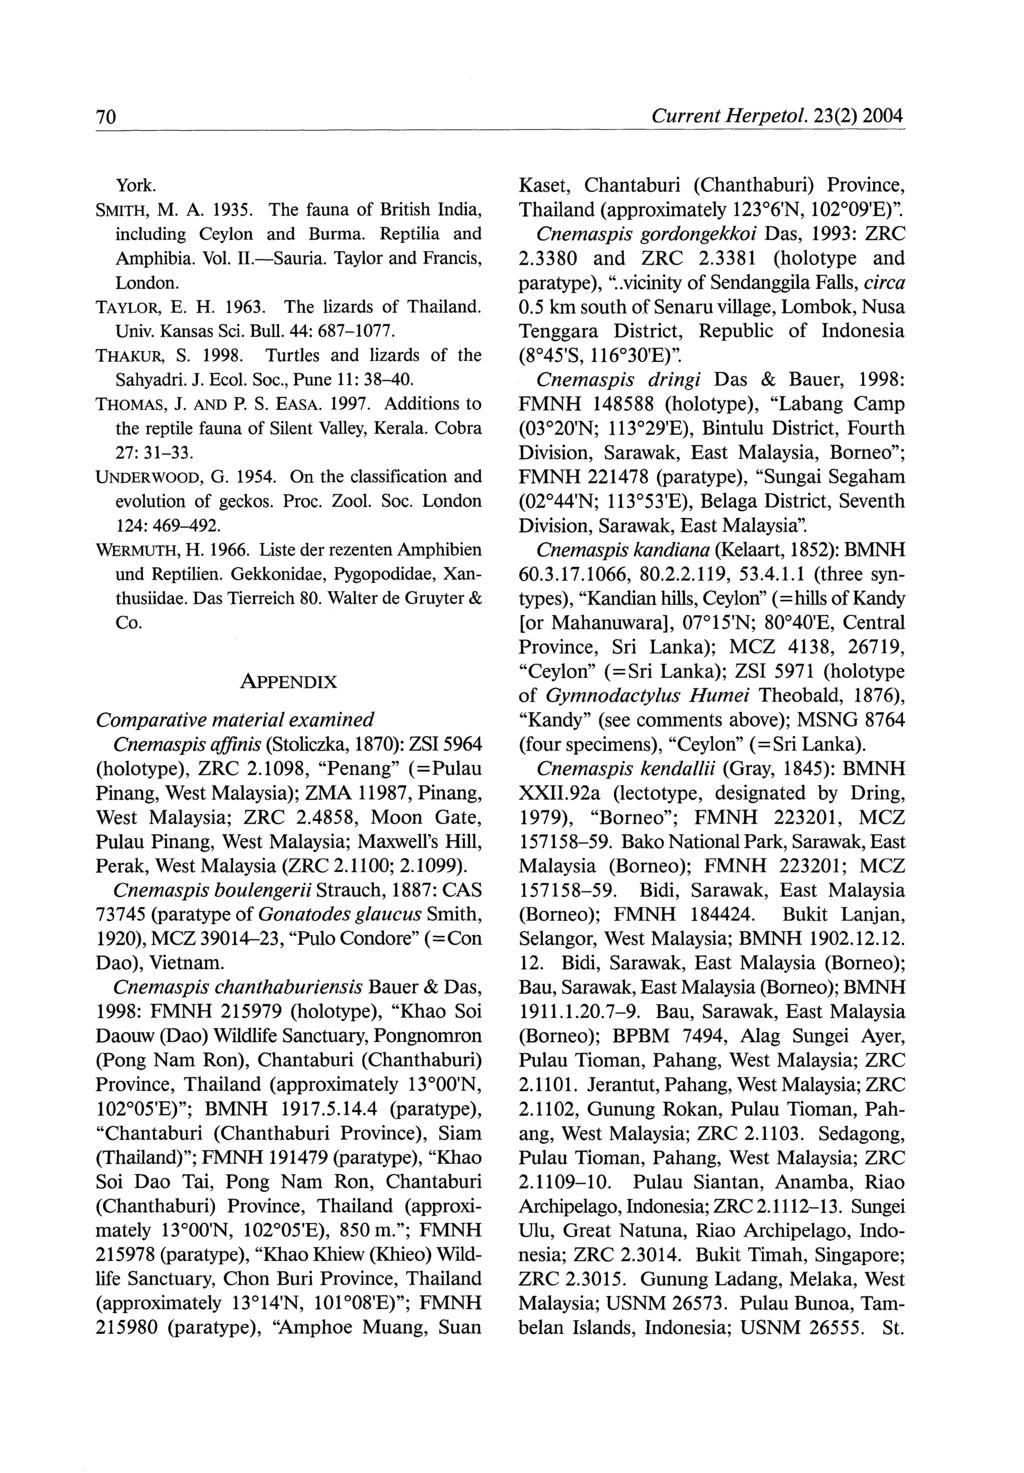 Current Herpetol. 23(2) 2004 York. SMITH, M. A. 1935. The fauna of British India, including Ceylon and Burma. Reptilia and Amphibia. Vol. IL-Sauria. Taylor and Francis, London. TAYLOR, E. H. 1963.